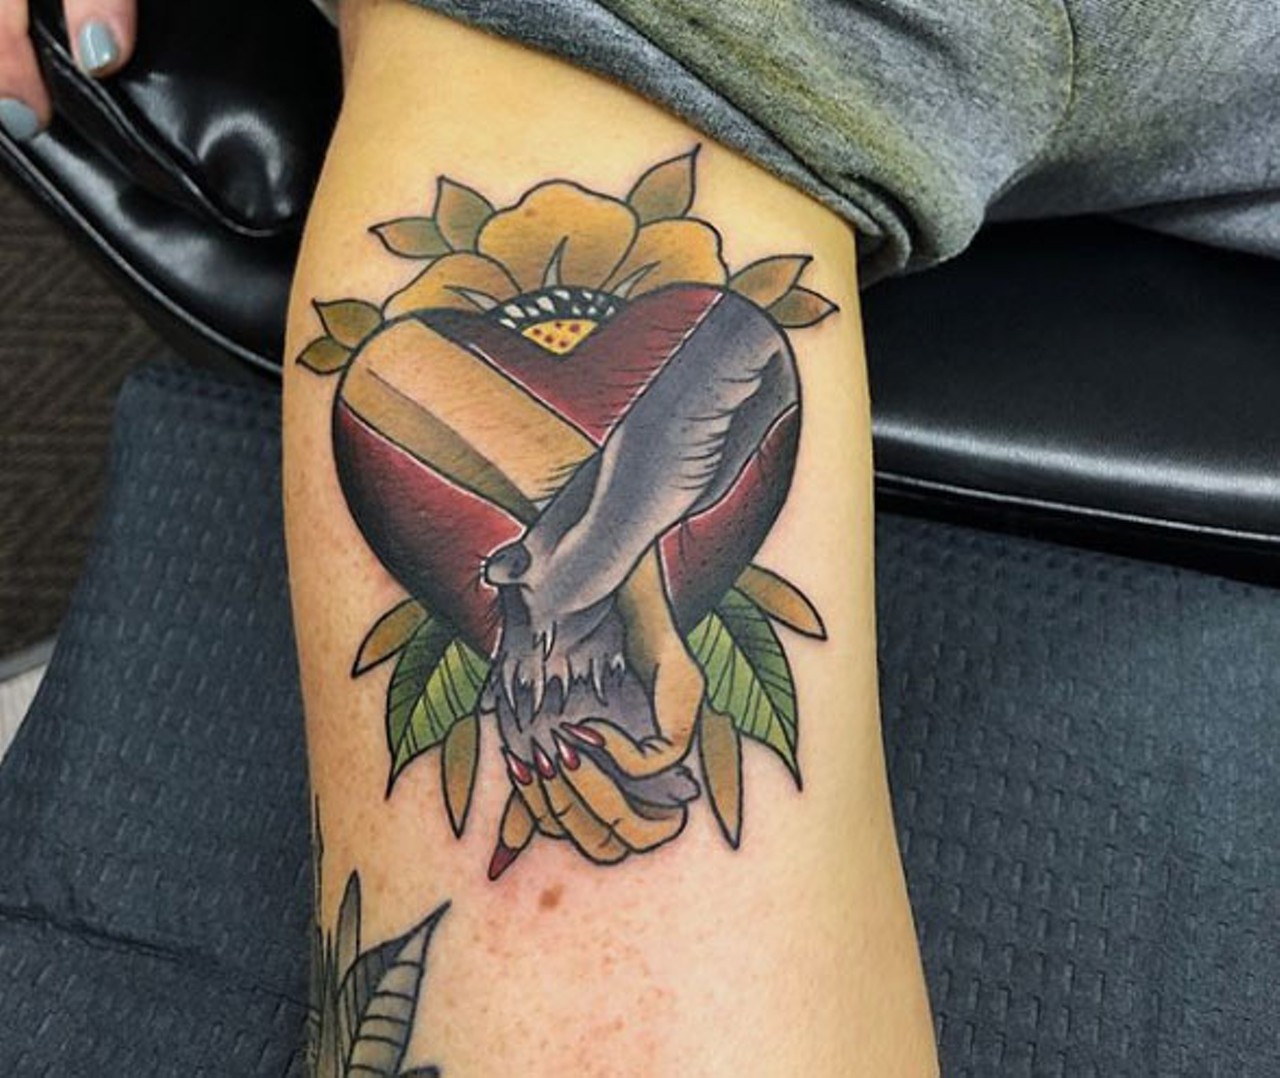 18 Cleveland Tattoo Shops You Should Already Be Following on Instagram |  Cleveland | Cleveland Scene